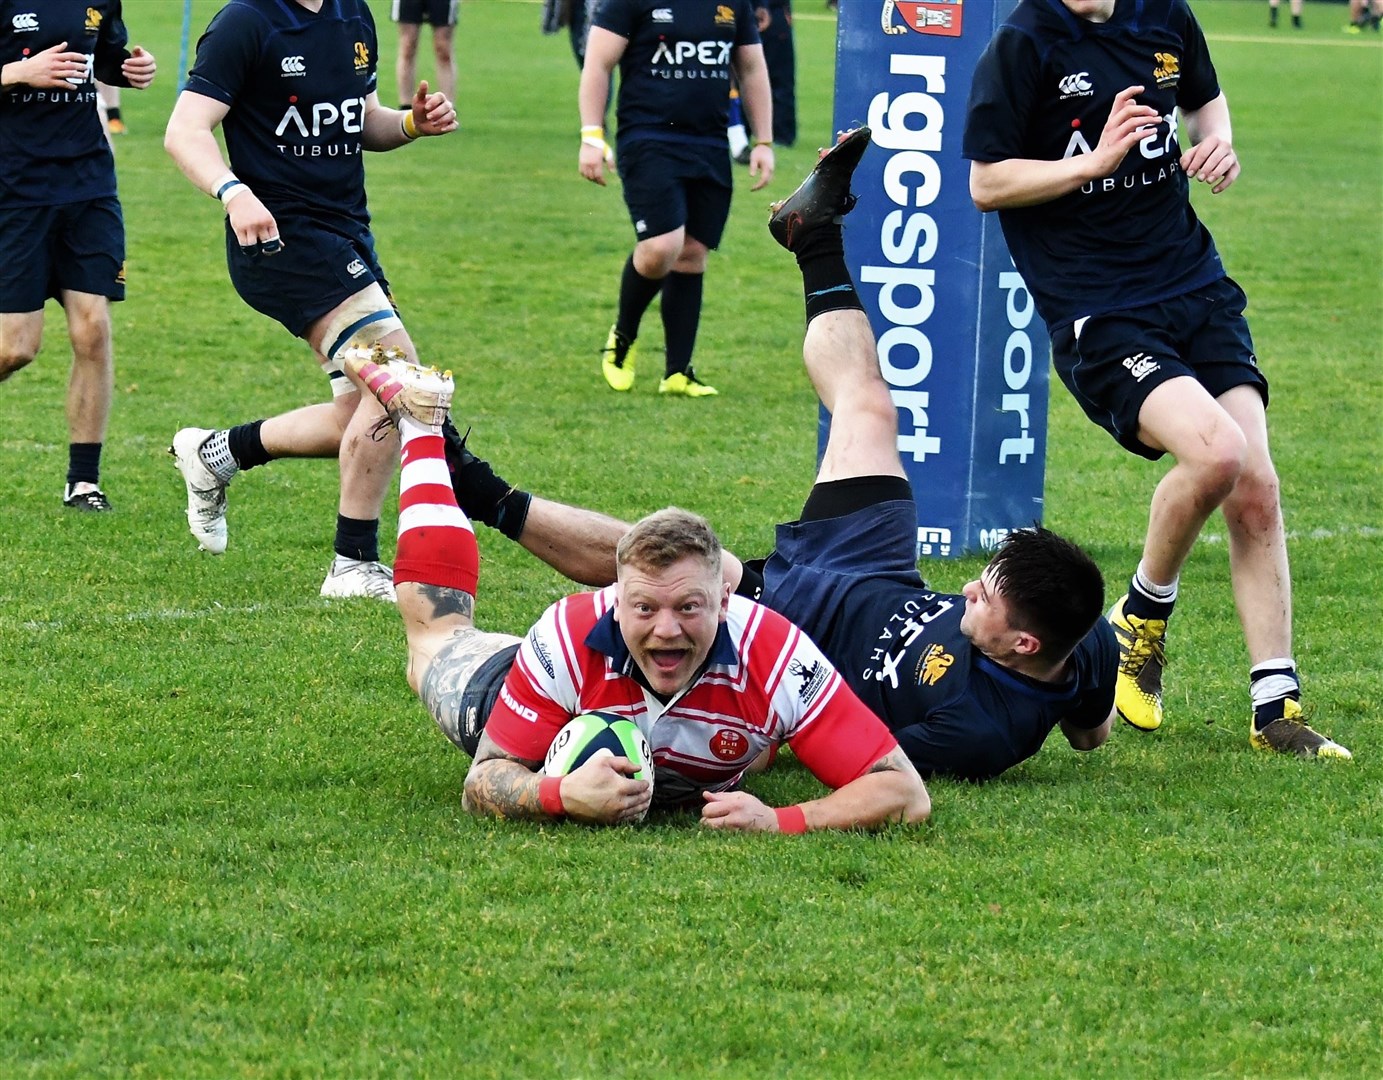 Lewis Scott is delighted as he goes over the line to score the winning try. Picture: James Officer